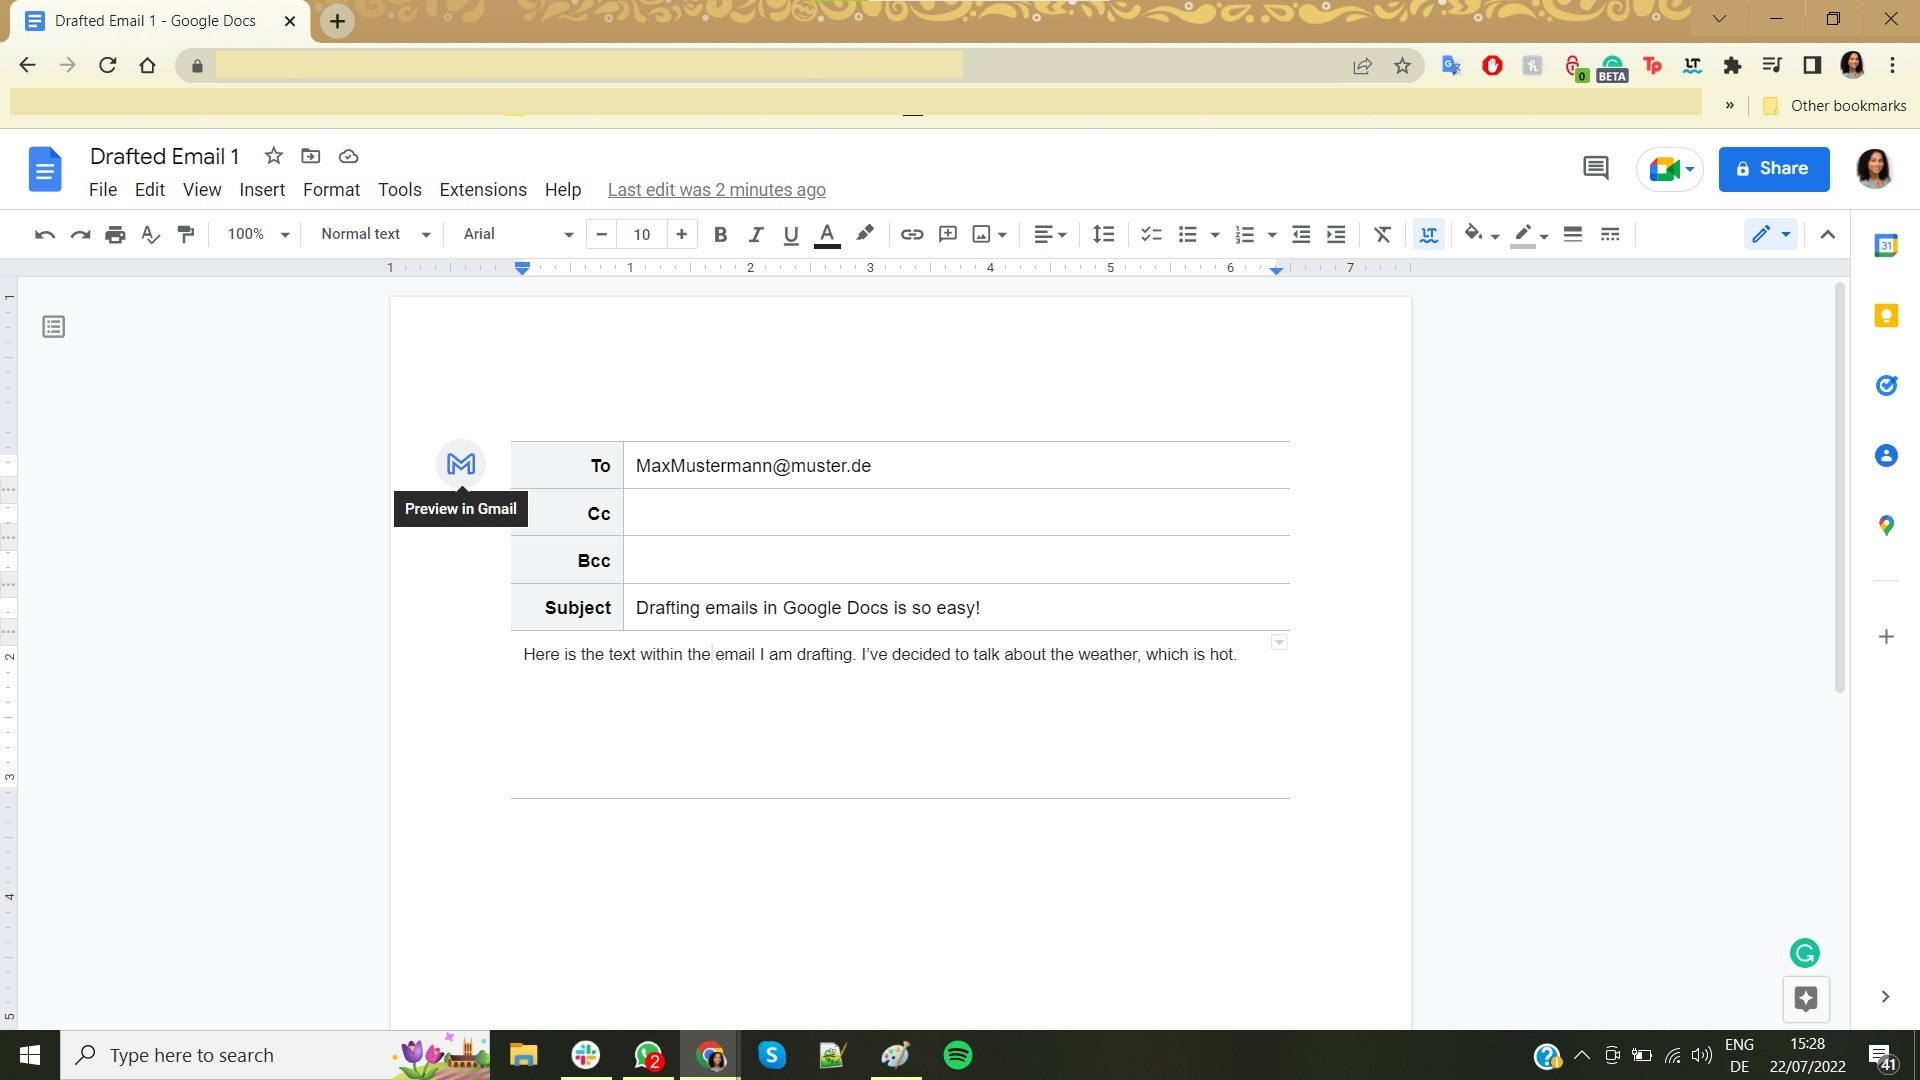 Writing a Gmail draft in Google Docs